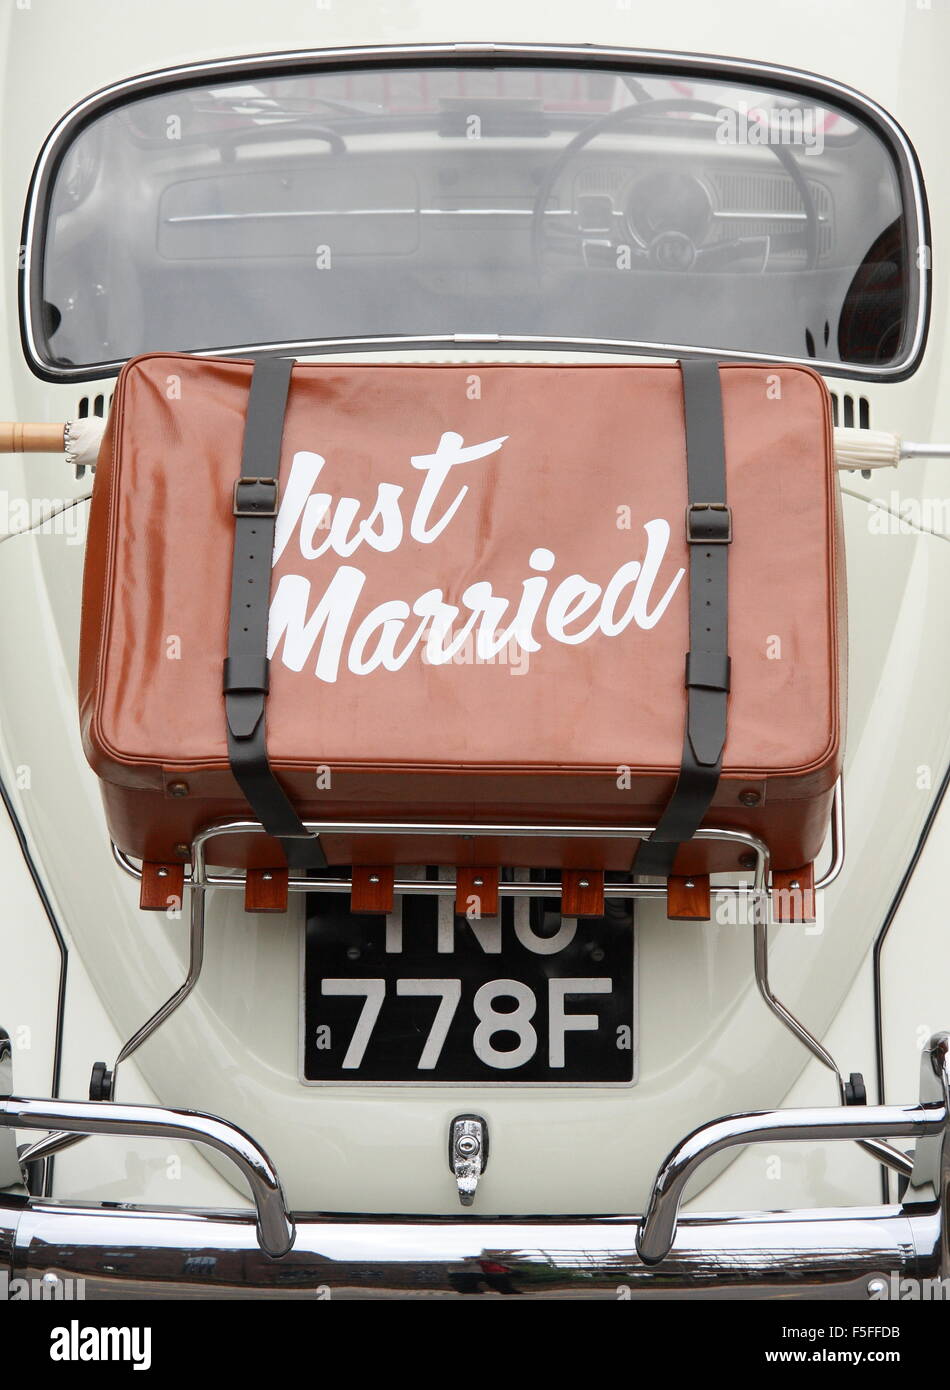 134 Just Married Car Decorations Stock Photos, High-Res Pictures, and  Images - Getty Images